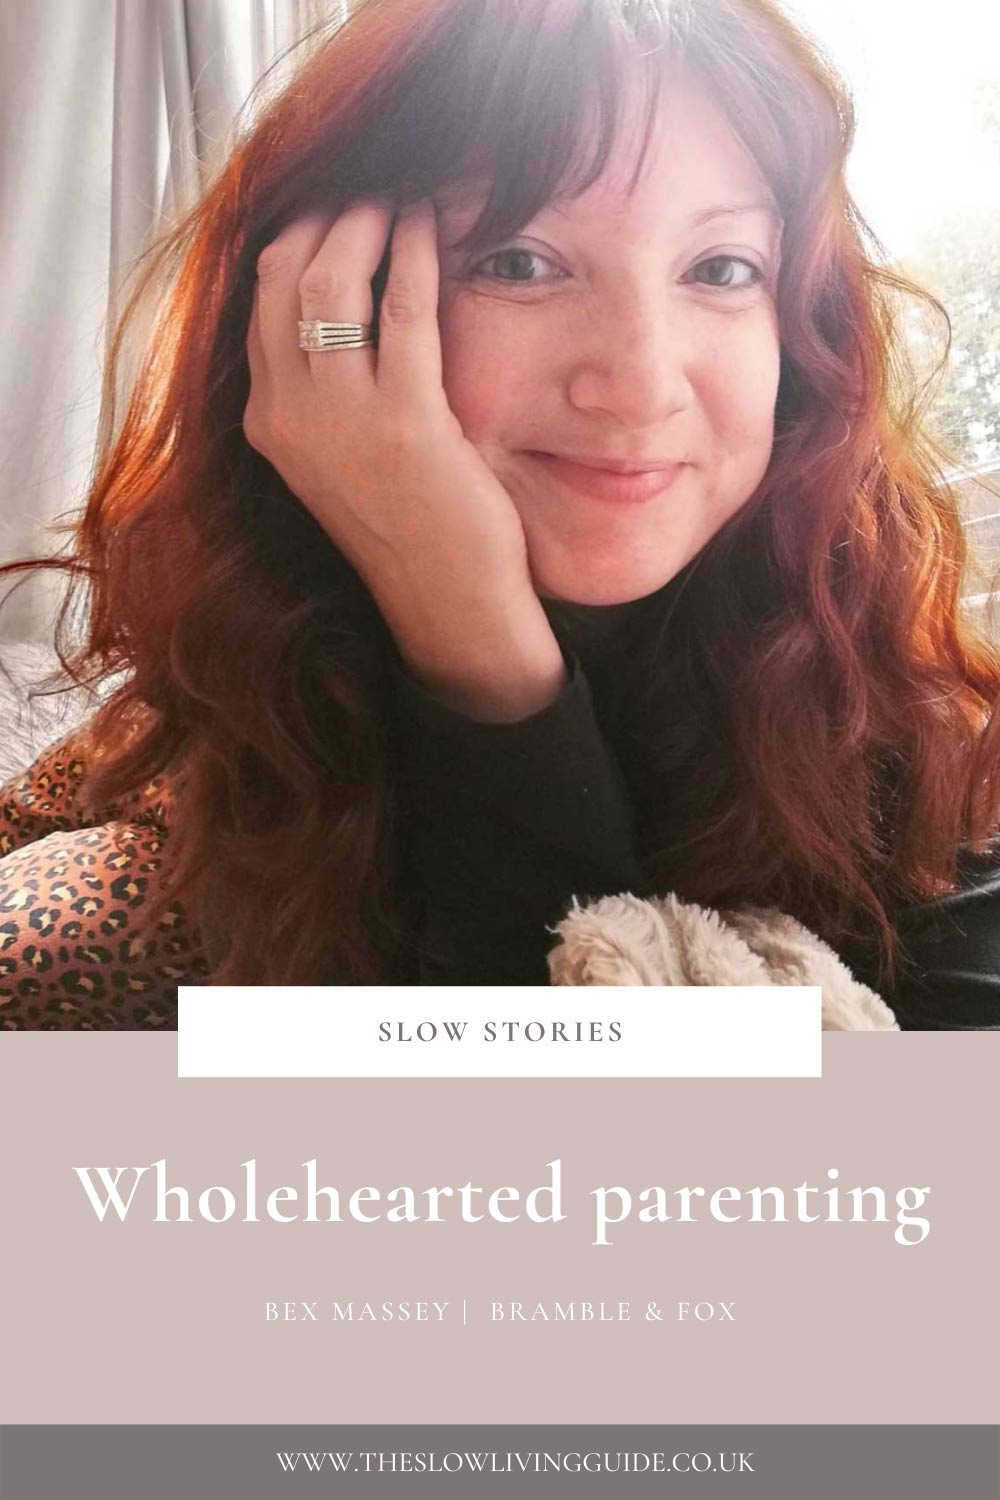 Wholehearted parenting - Bex Massey - pin